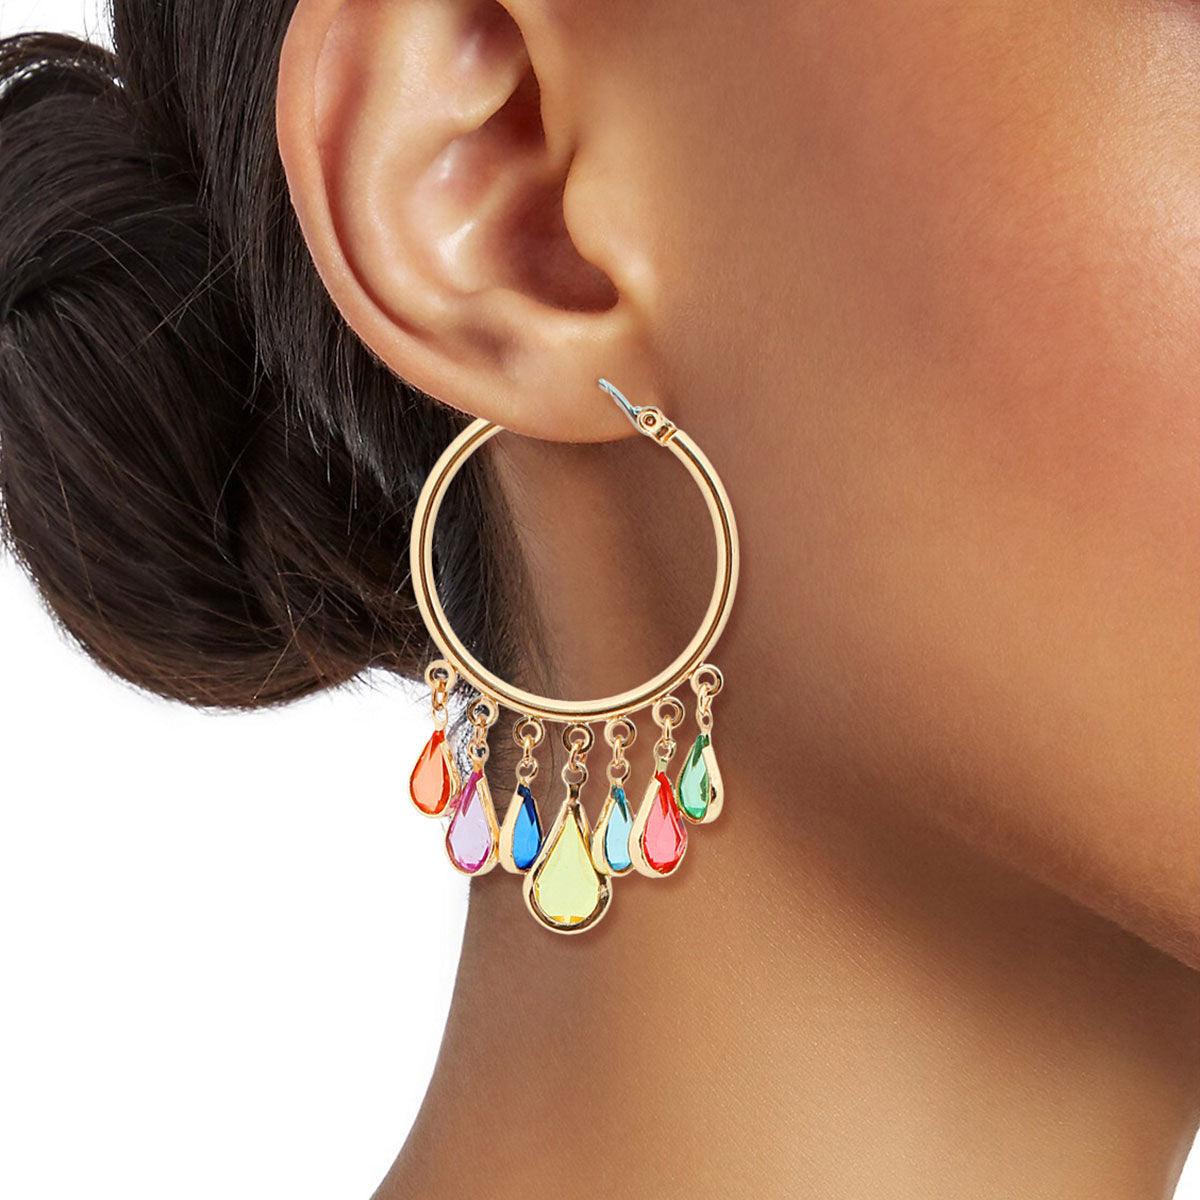 Colorful Teardrop Earrings to Liven Up Your Look